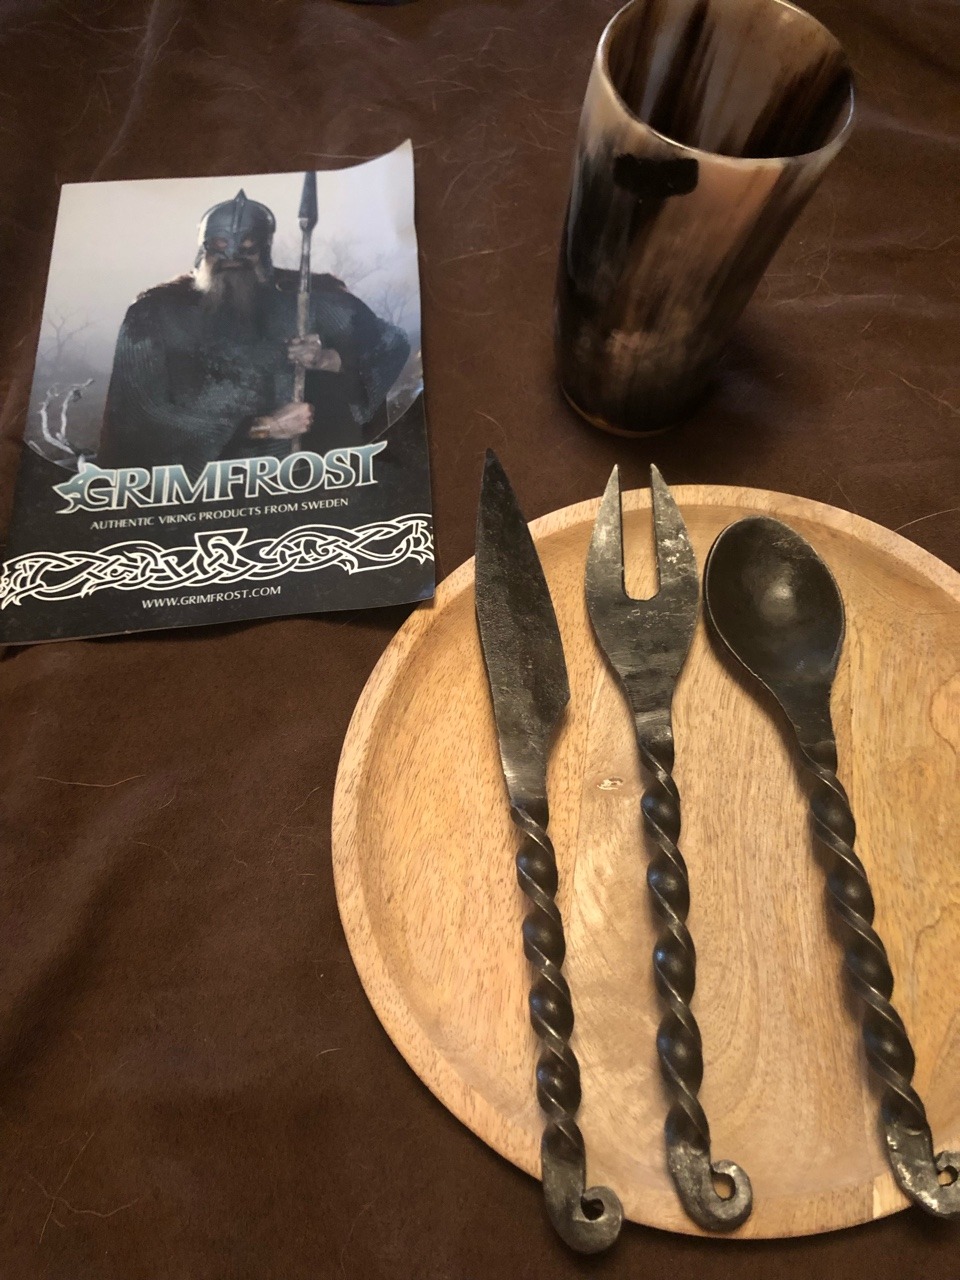 My order from Grimfrost came today! I can’t adult photos